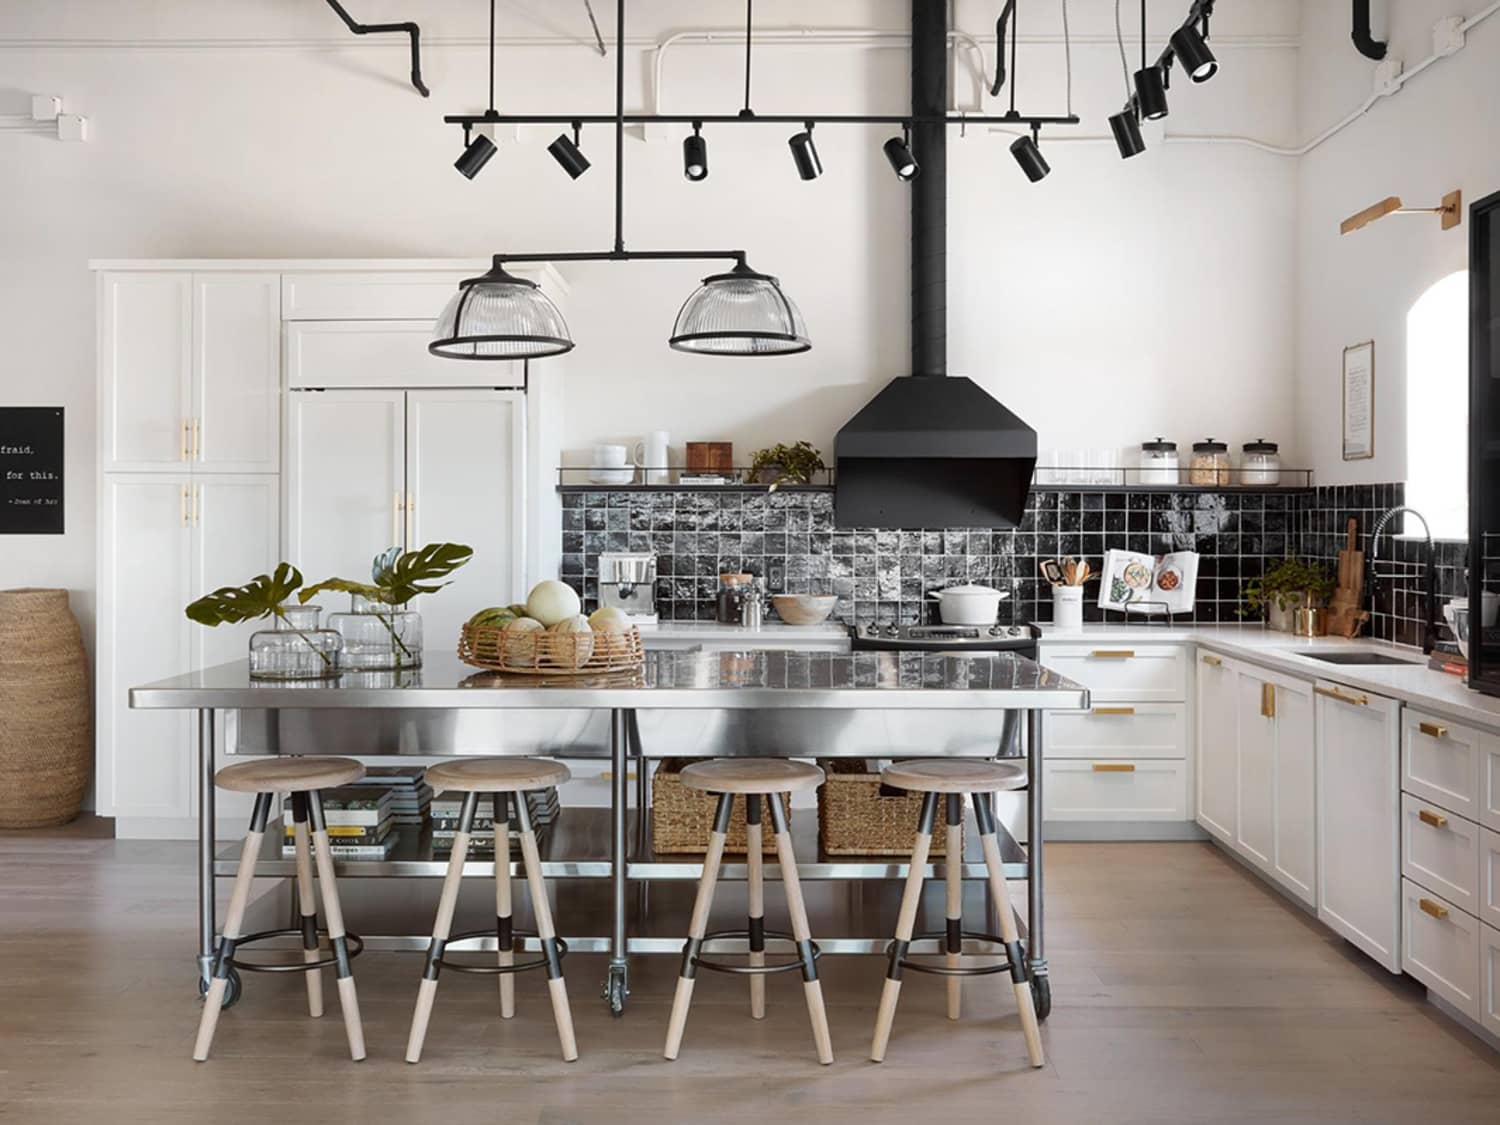 Joanna Gaines Kitchen Lighting – Things In The Kitchen